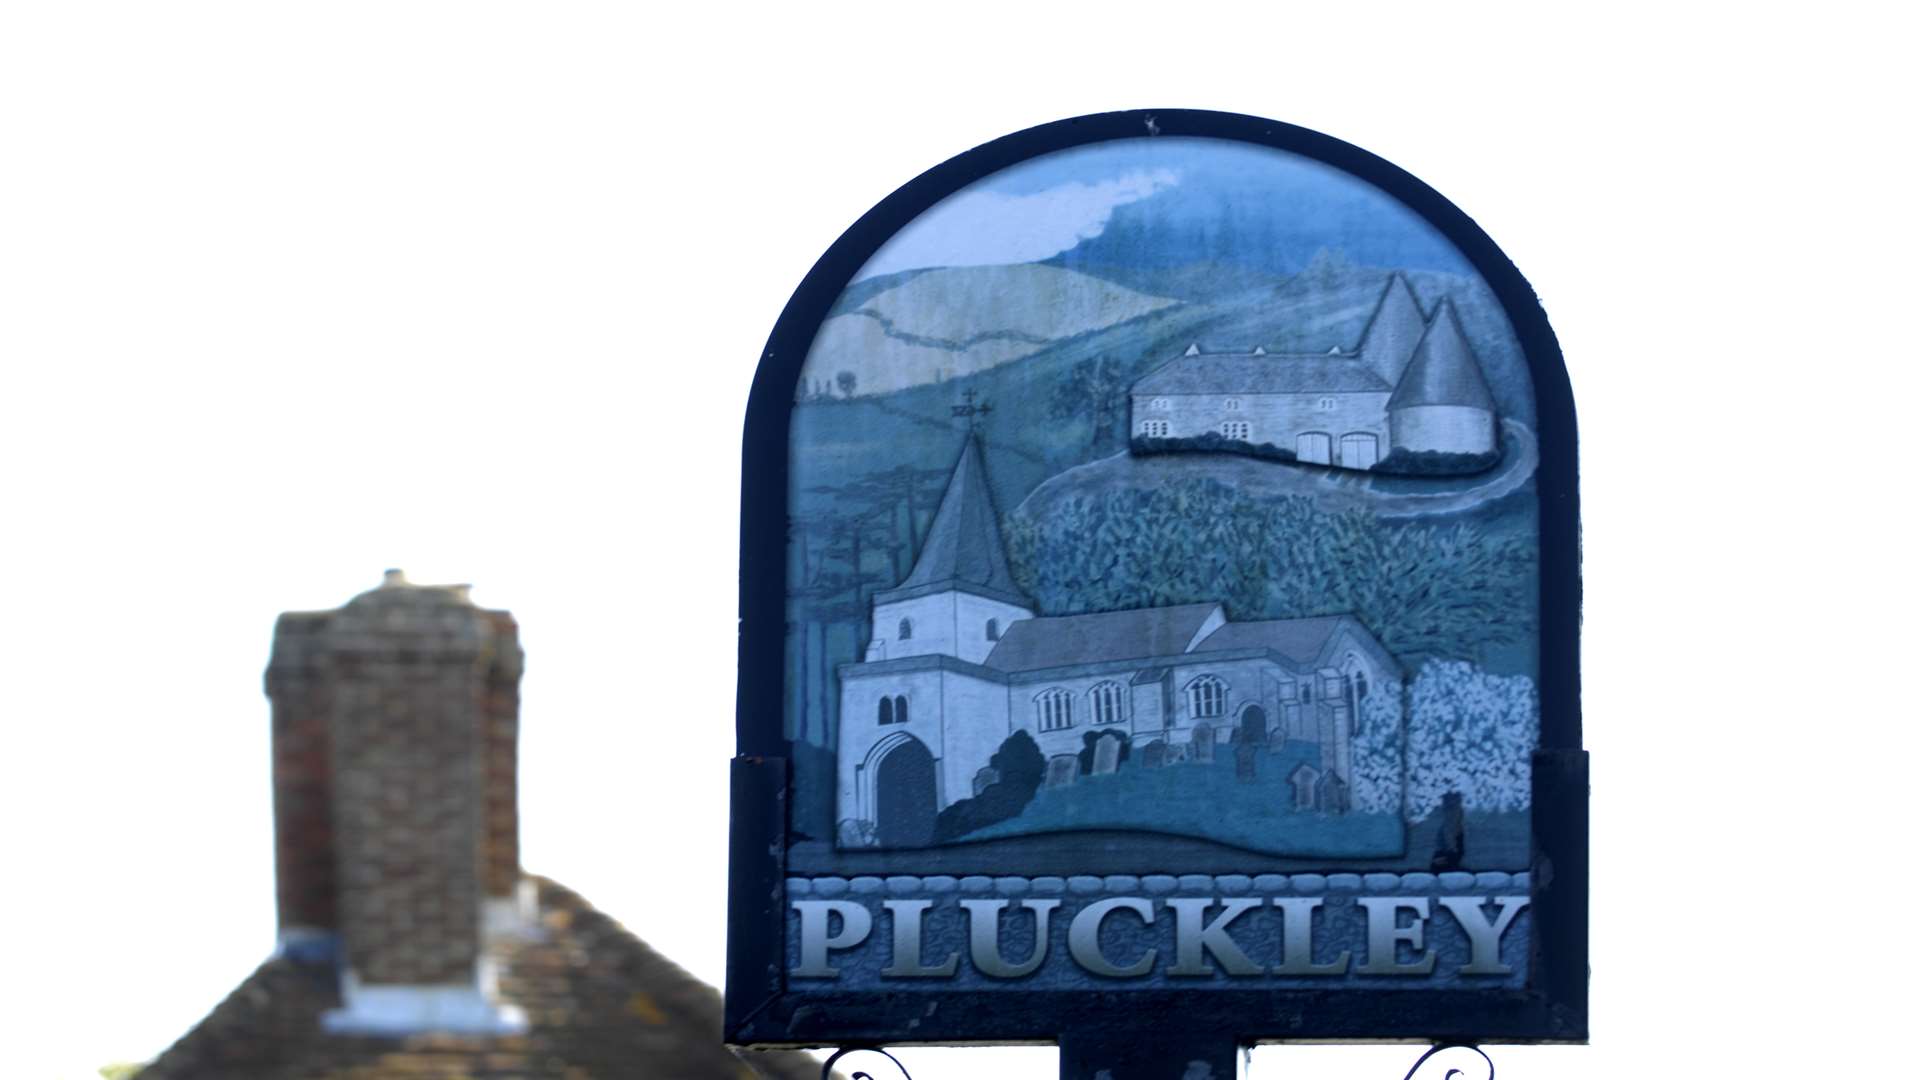 Pluckley is said to be one of the most haunted places